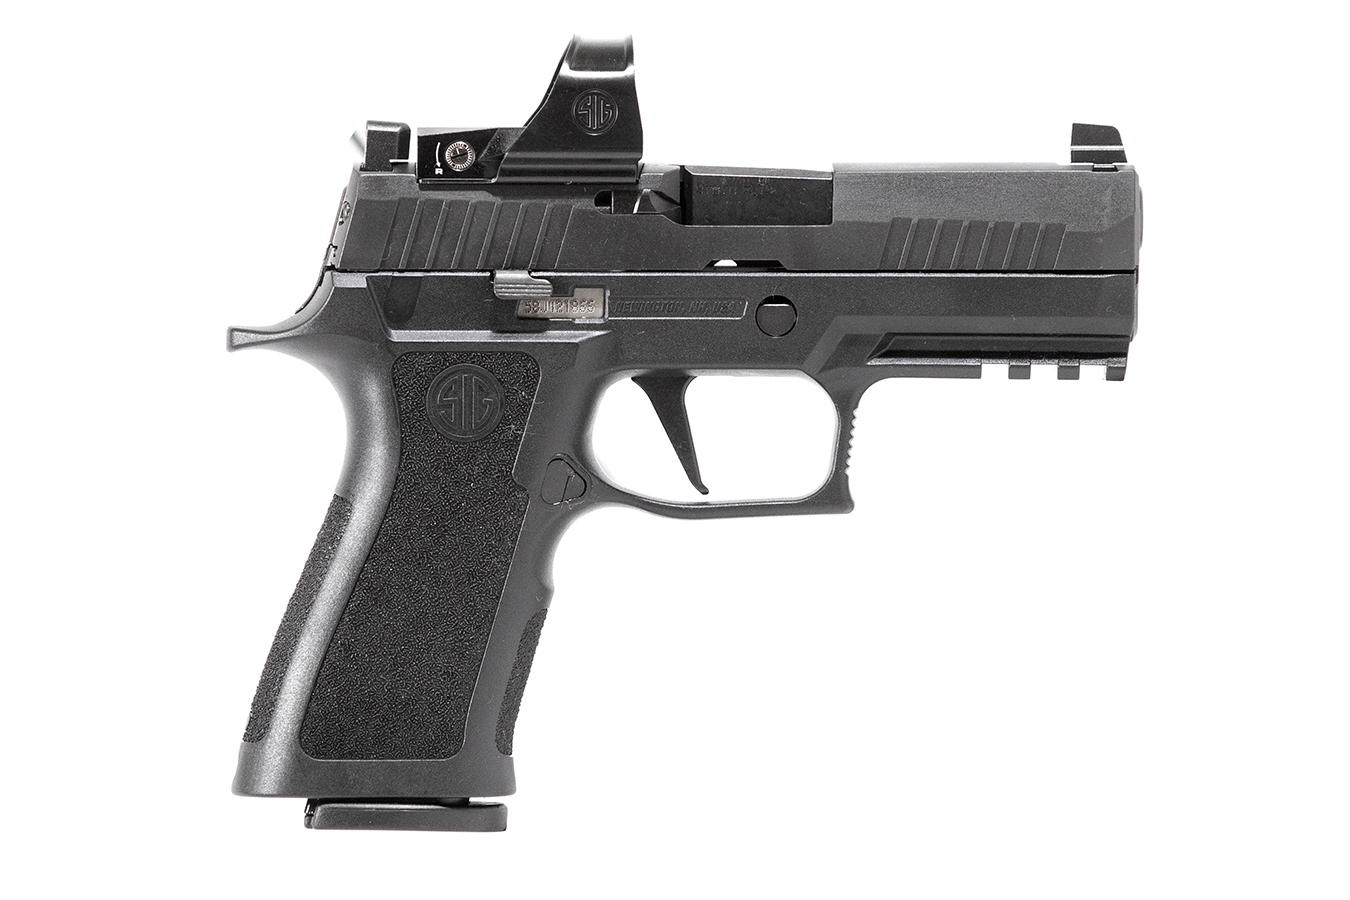 SIG SAUER P320 RXP X-COMPACT 9MM PISTOL WITH ROMEO1 PRO OPTIC (LE)